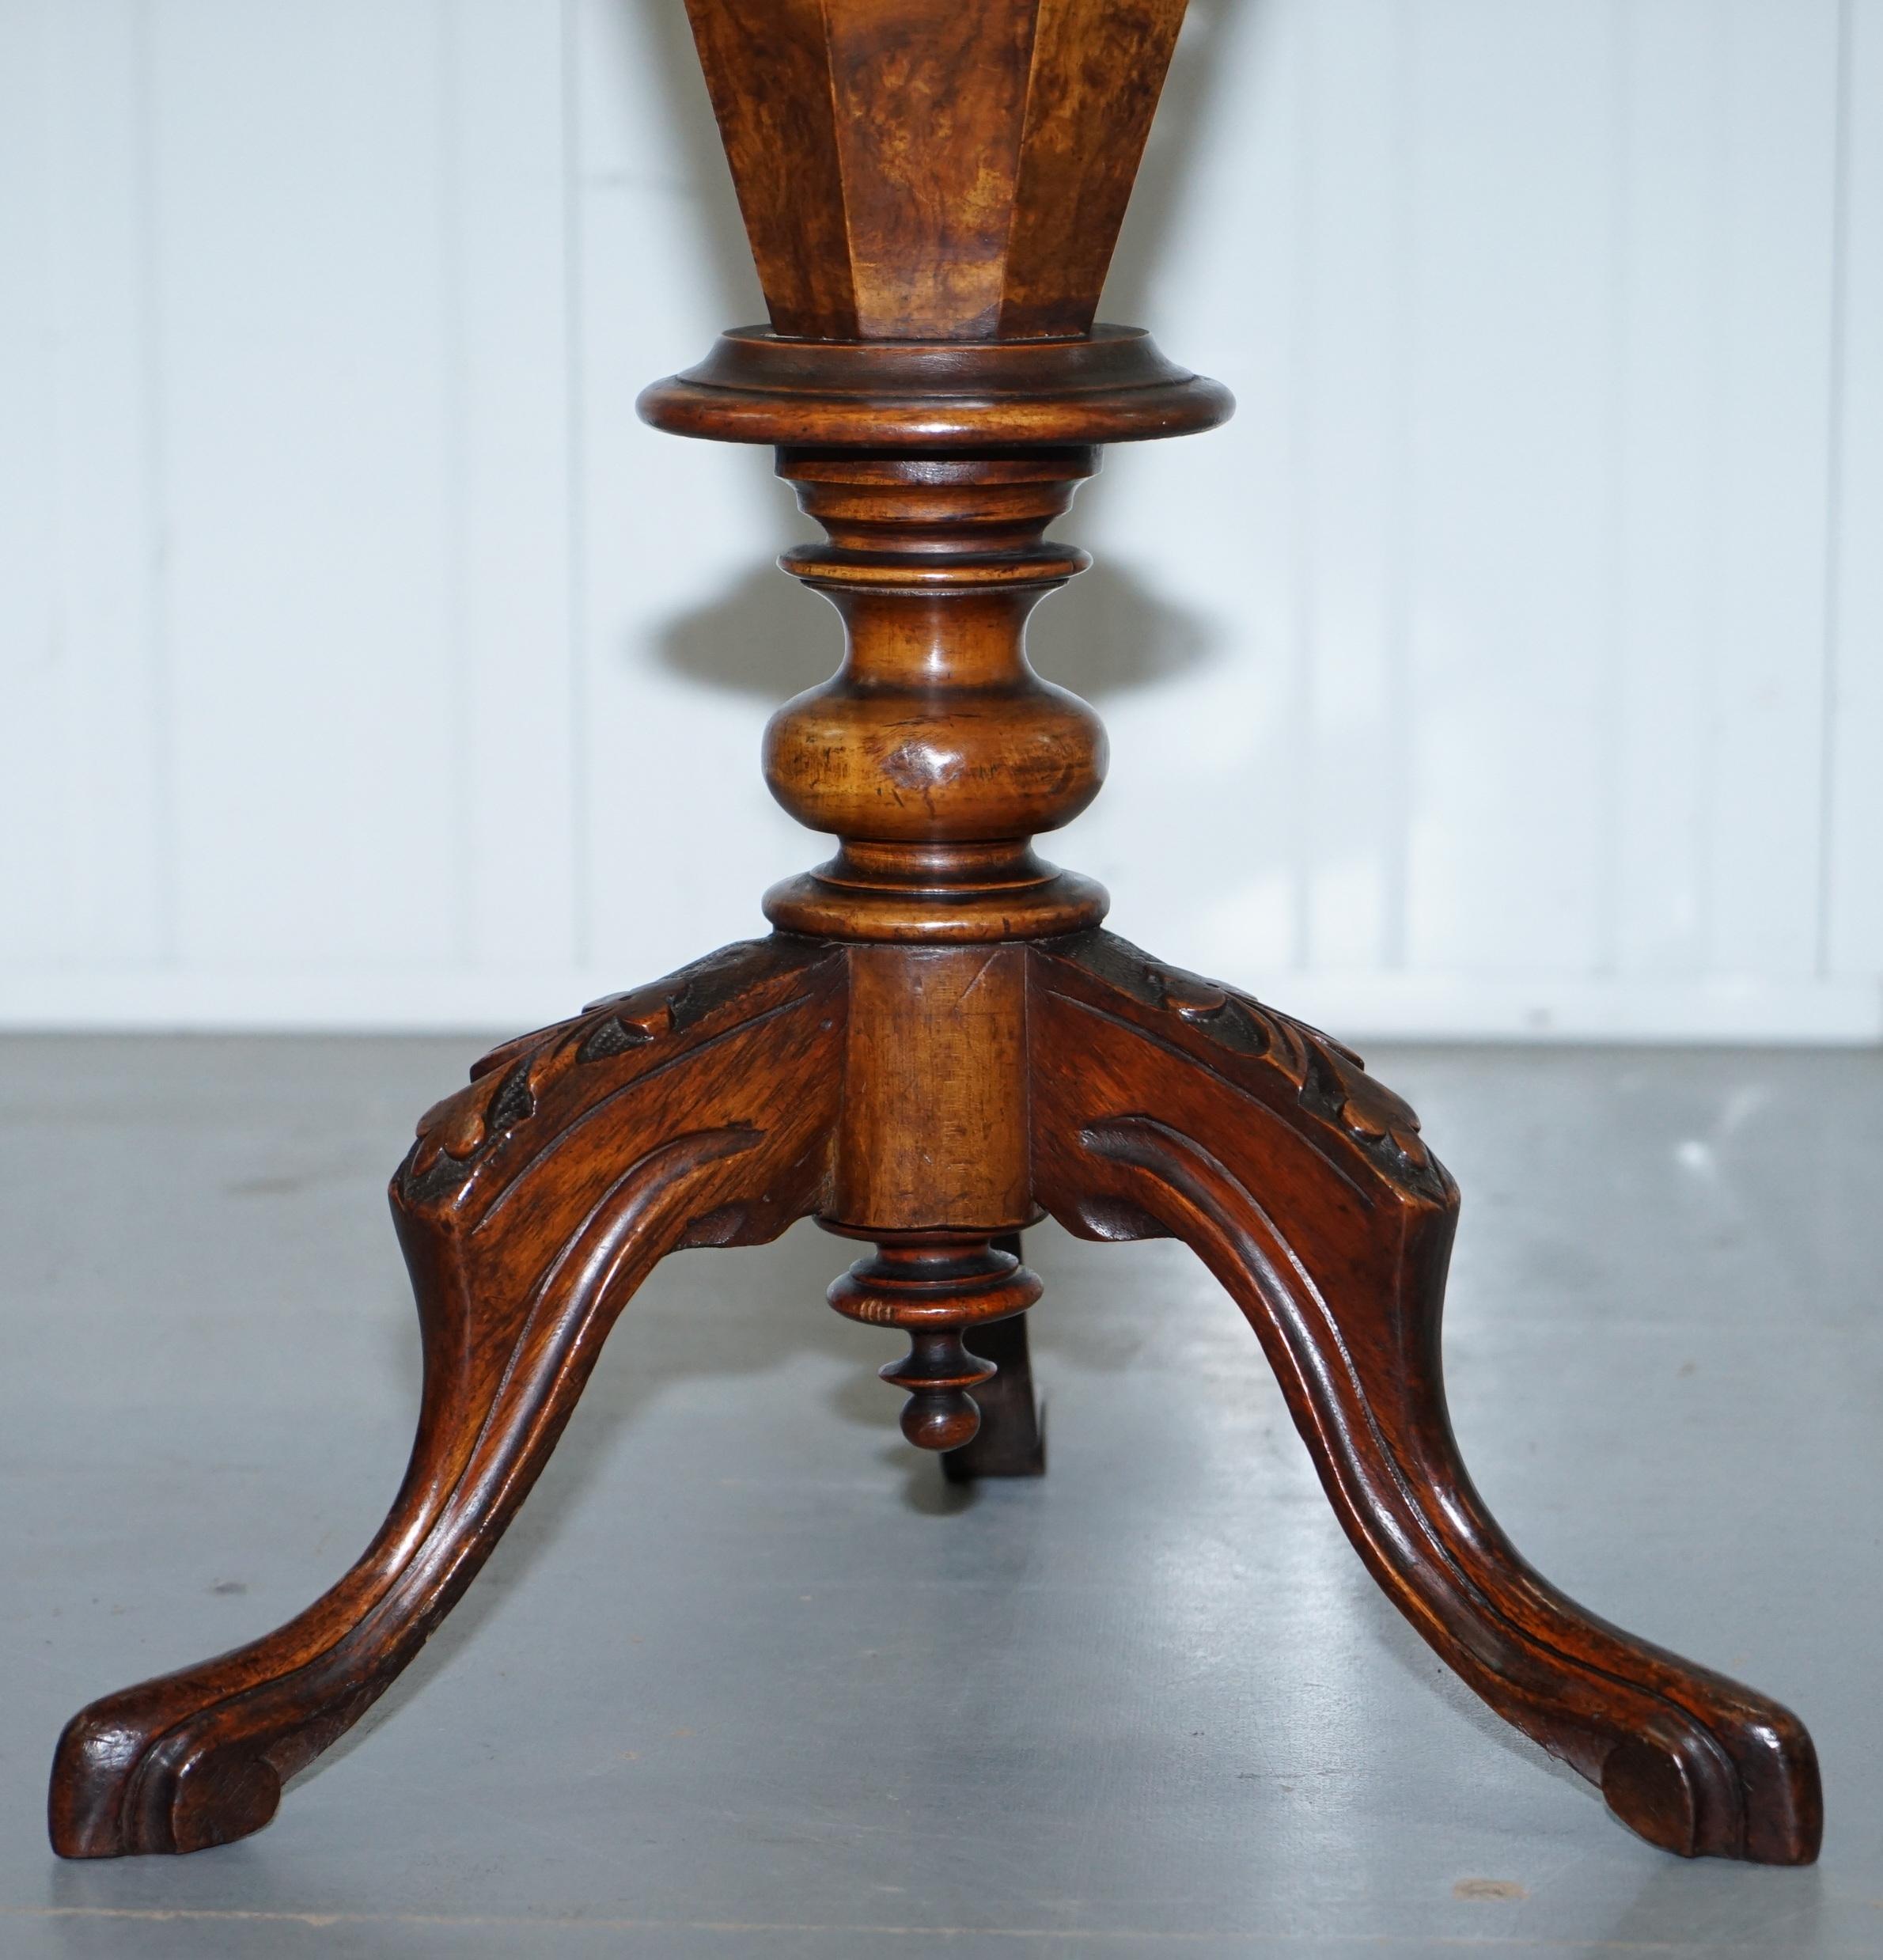 Stunning Burr Walnut Victorian Sewing or Work Box Great as Side Lamp End Table 2